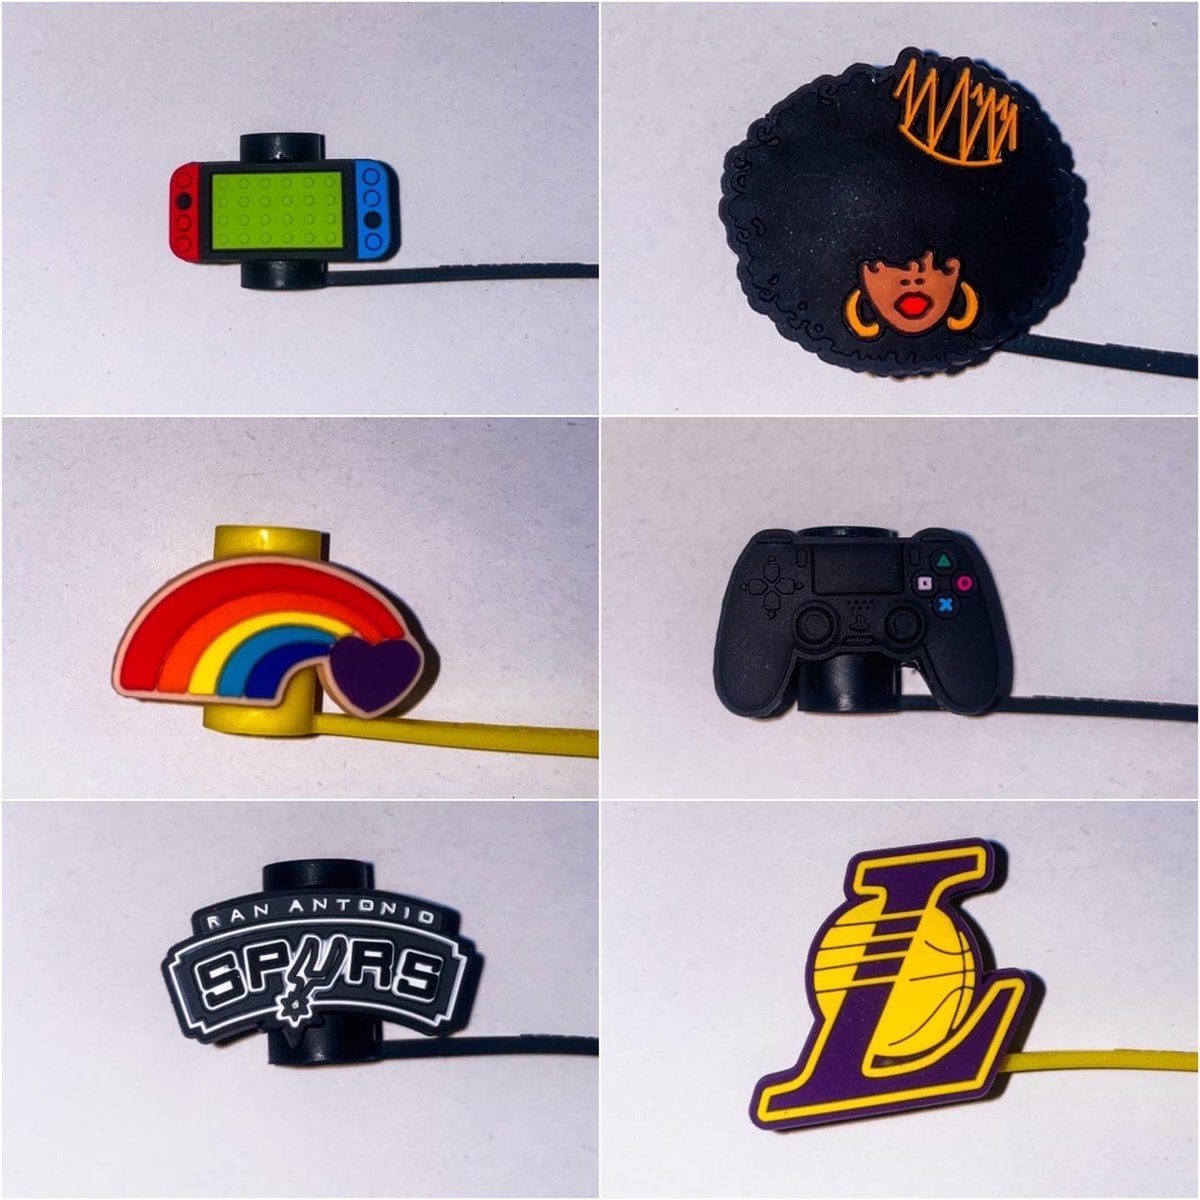 https://assets.bigcartel.com/product_images/825f1739-8b79-4e75-b0a1-6f7a740d2eb7/sports-straw-toppers.jpg?auto=format&fit=max&h=1200&w=1200